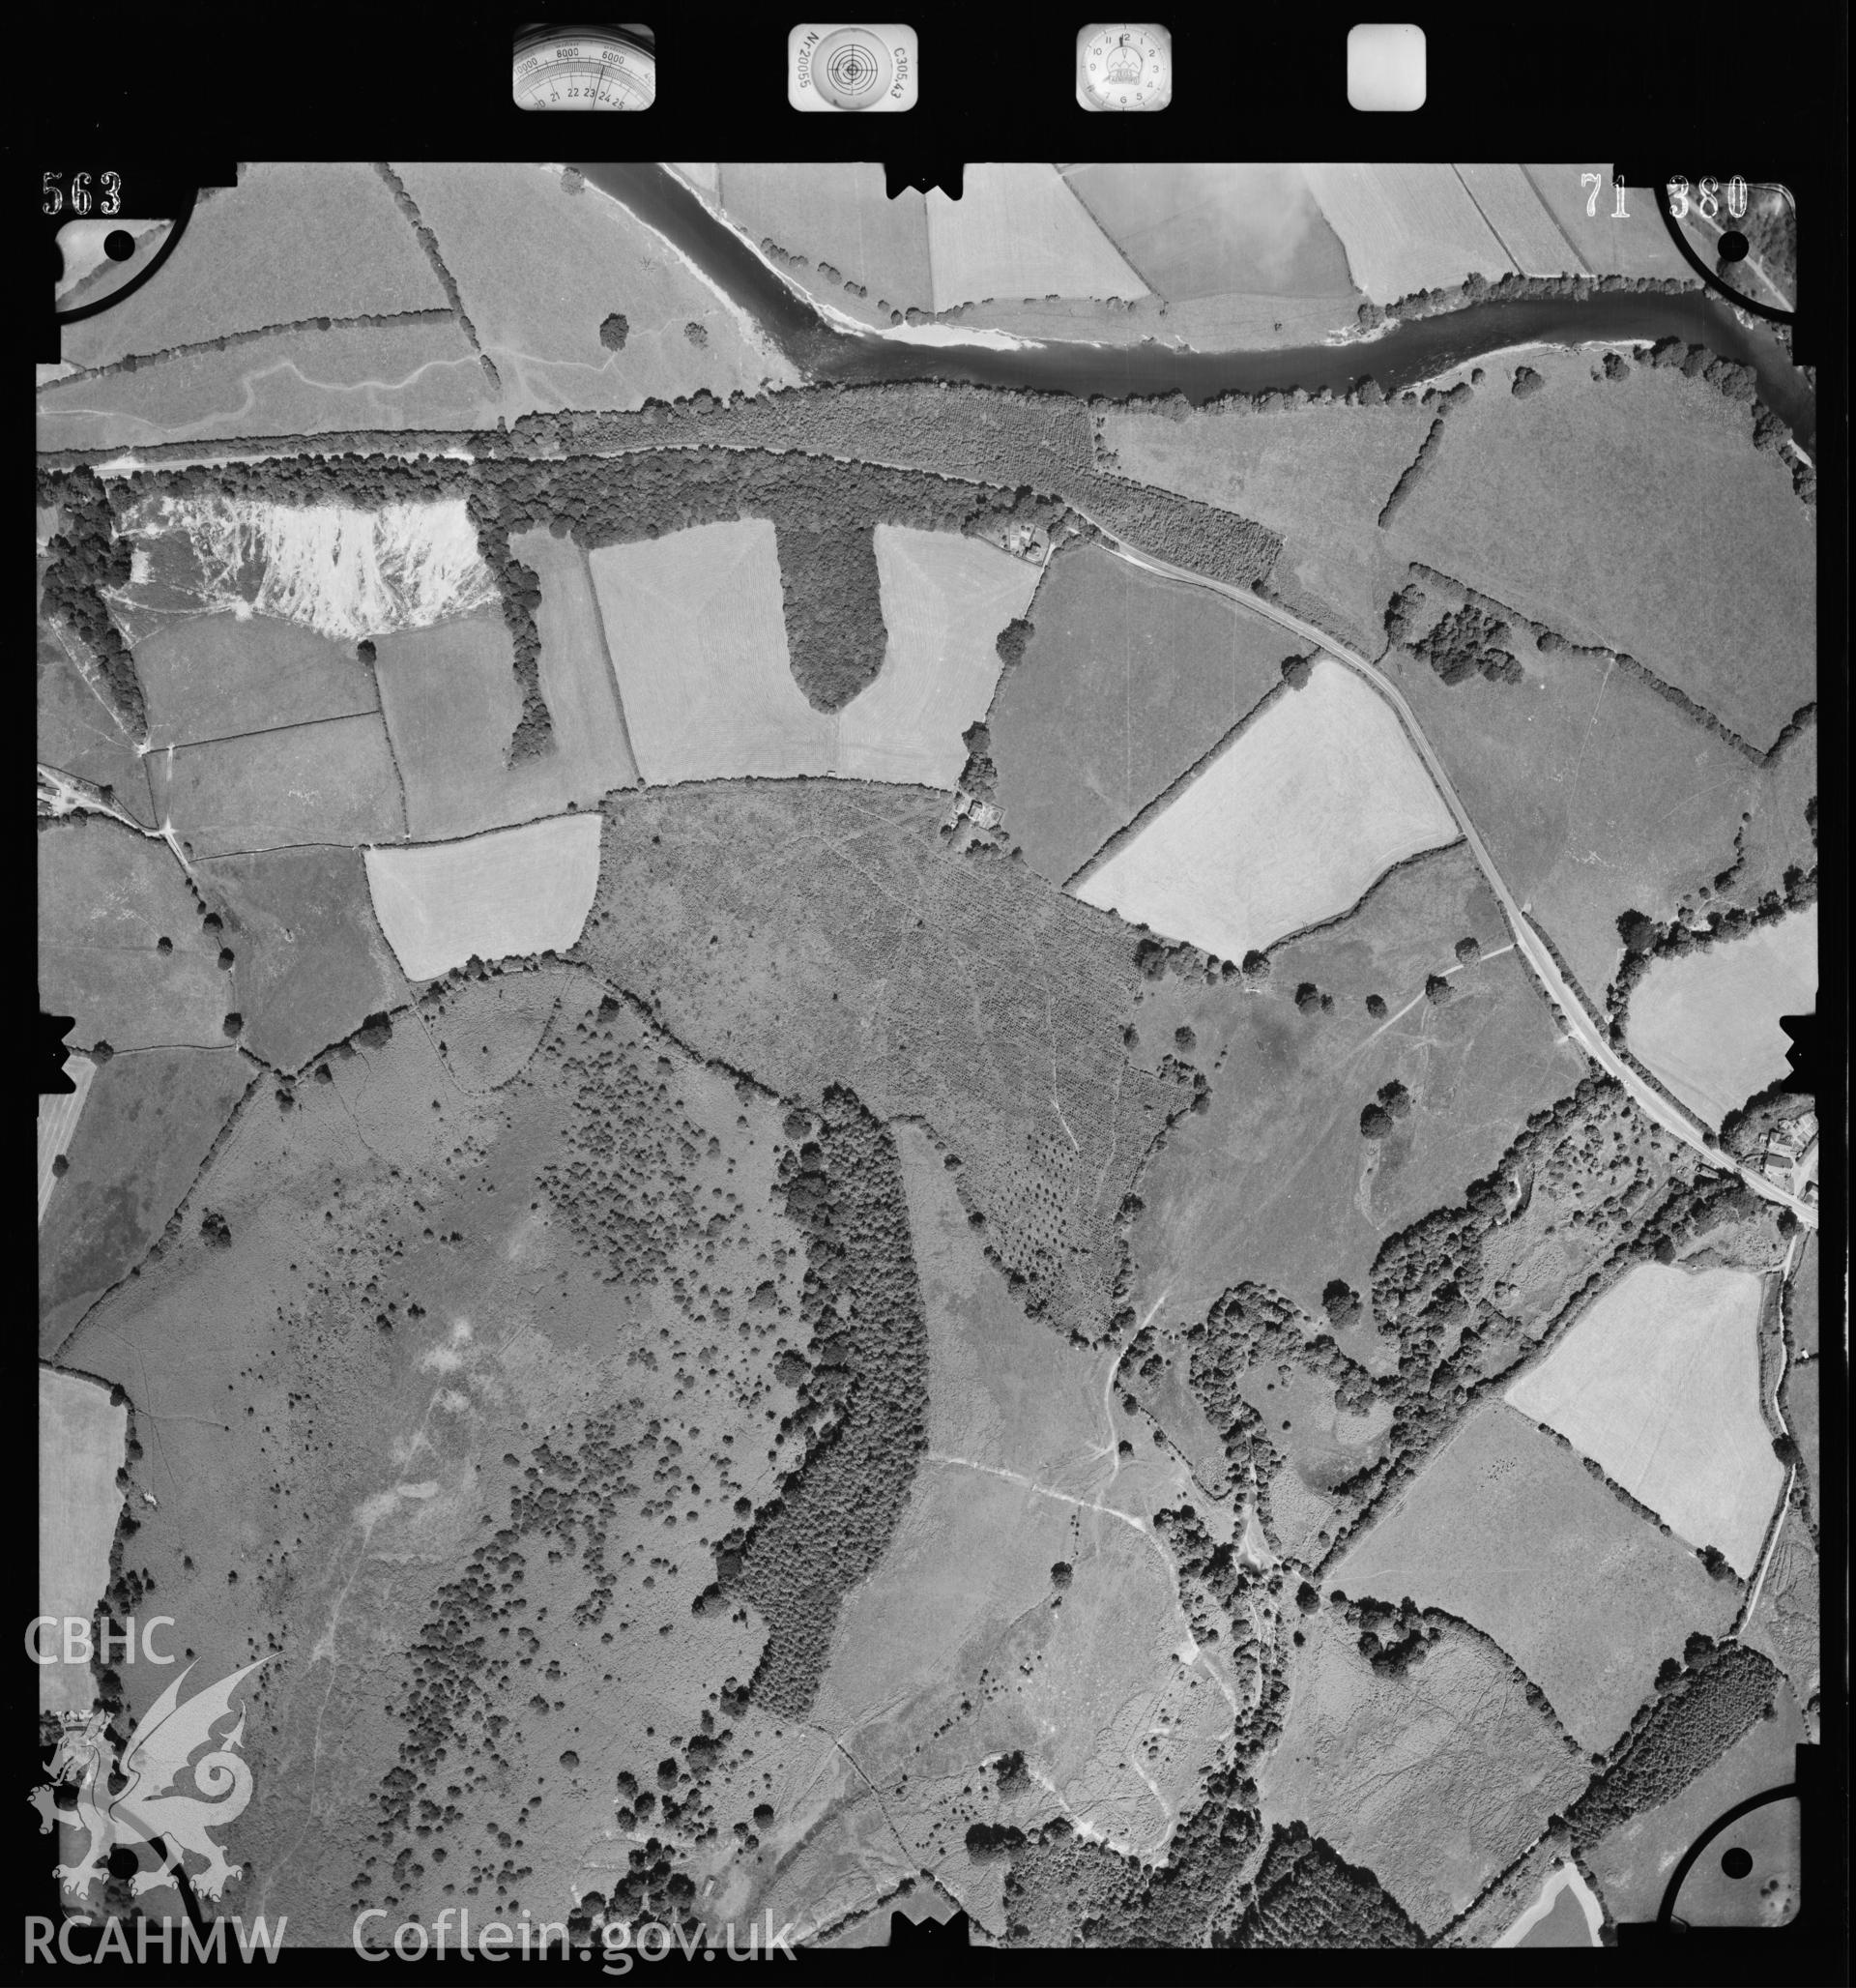 Digital copy of a black and white aerial photograph of an area near Builth Wells, taken by the Ordnance Survey in 1971, at an altitude of 6,600 feet. Grid reference SO0550.